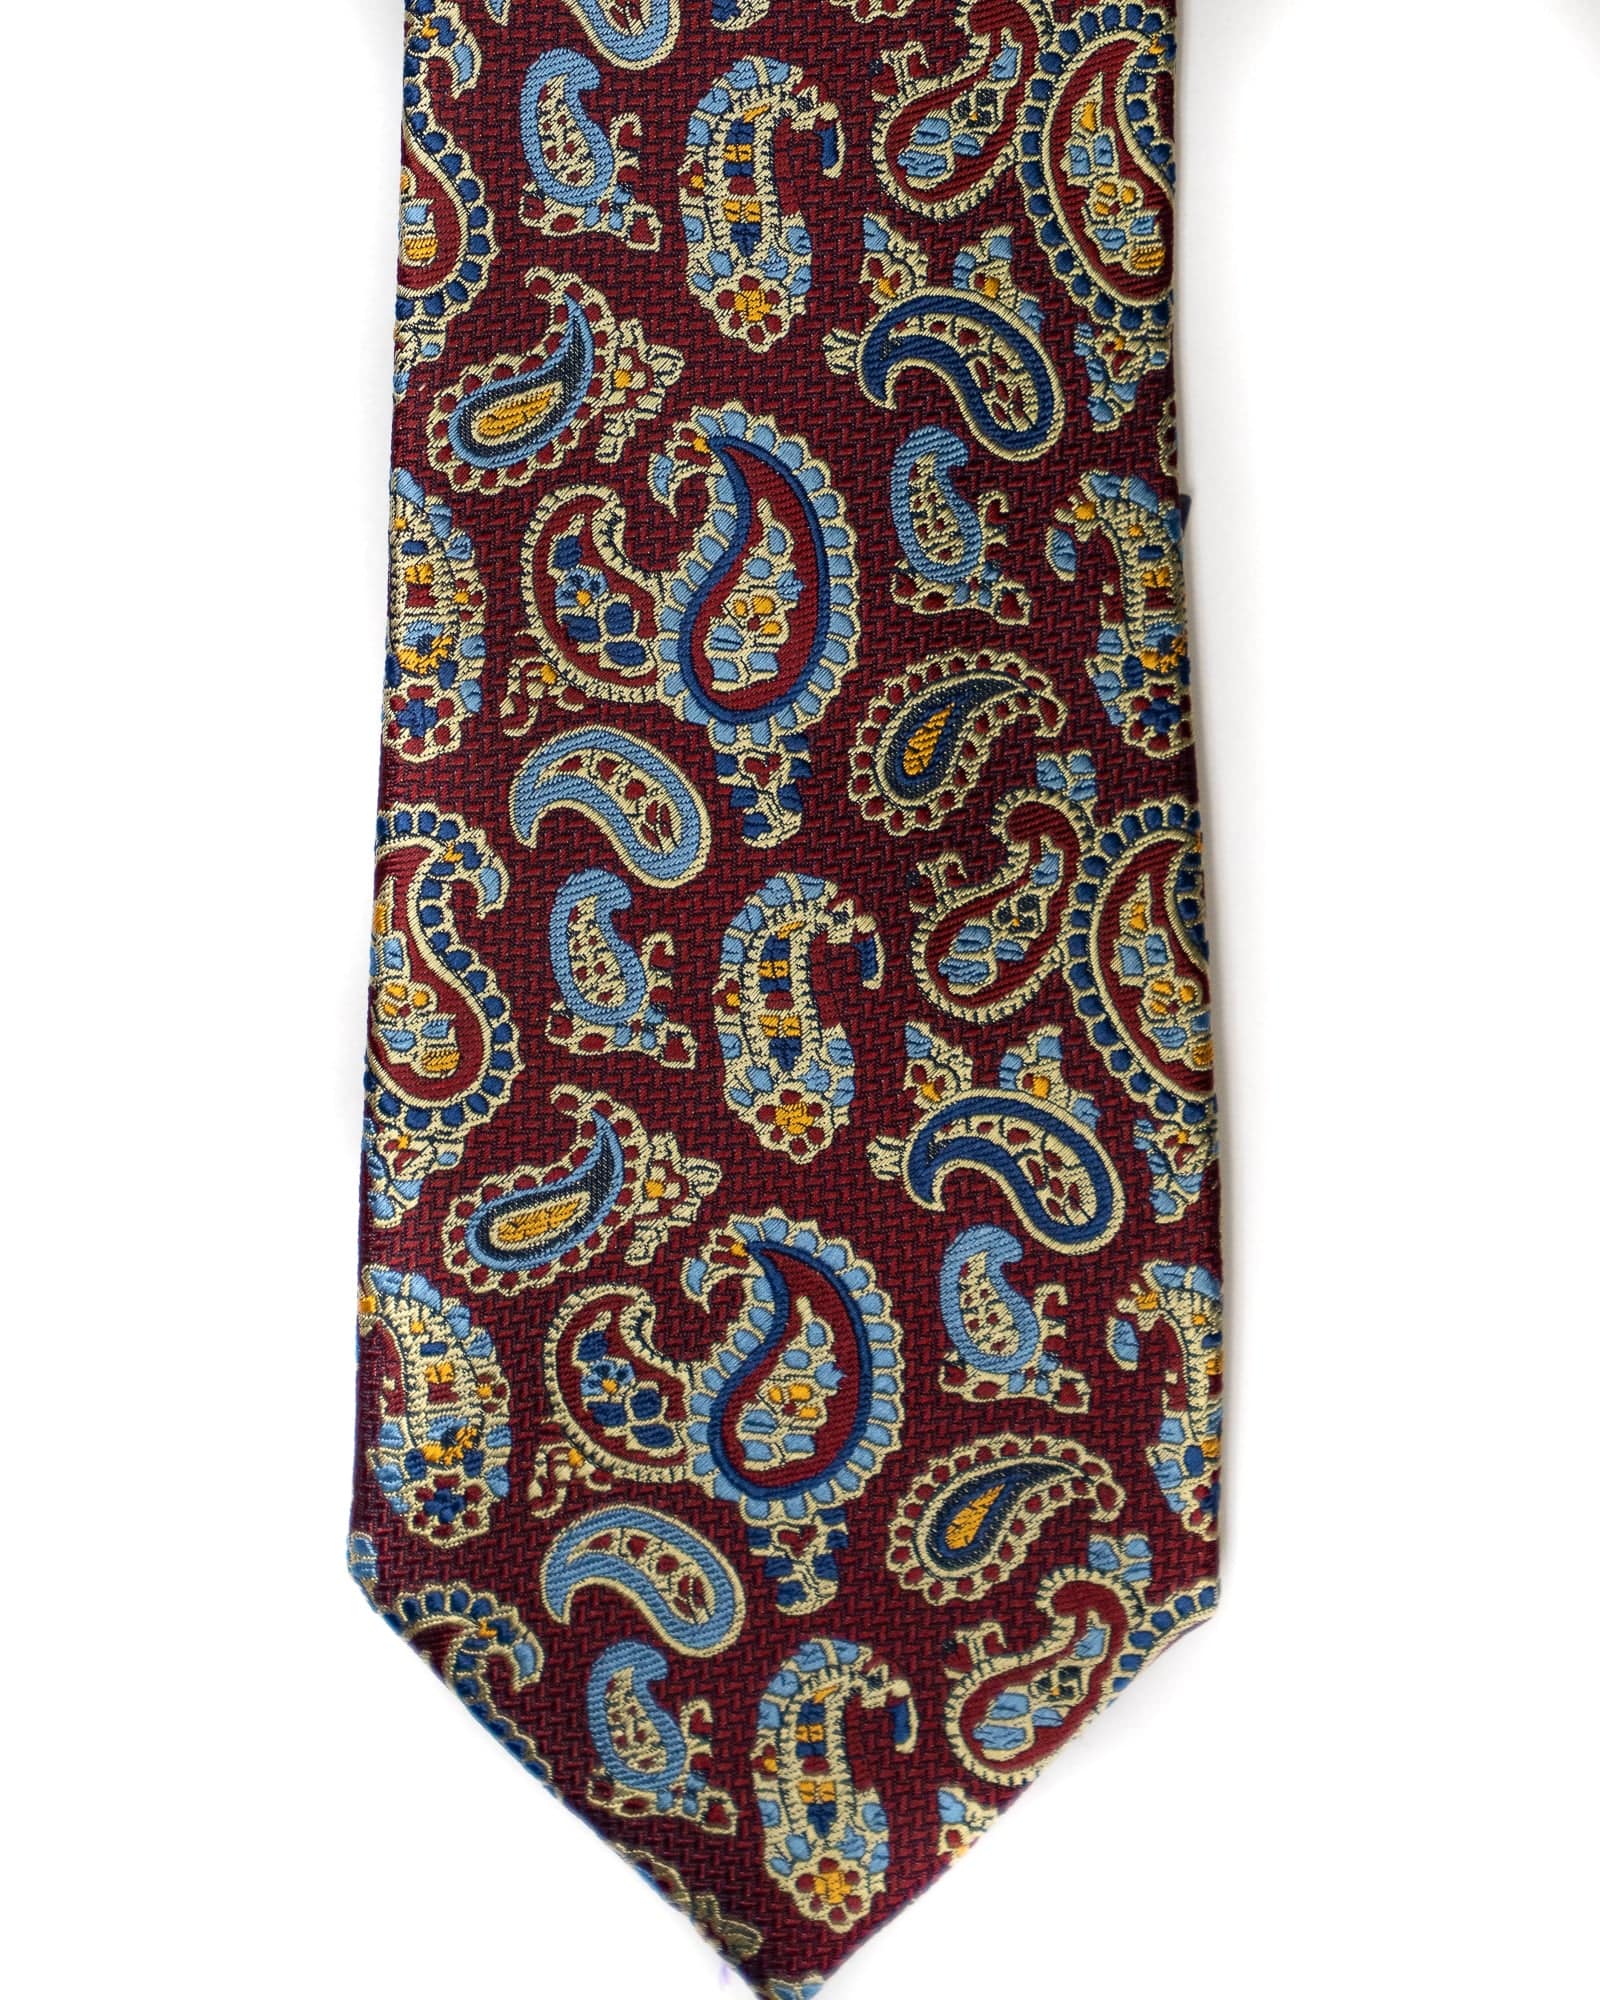 Paisley Silk Tie in Burgundy With Tan - Rainwater's Men's Clothing and Tuxedo Rental